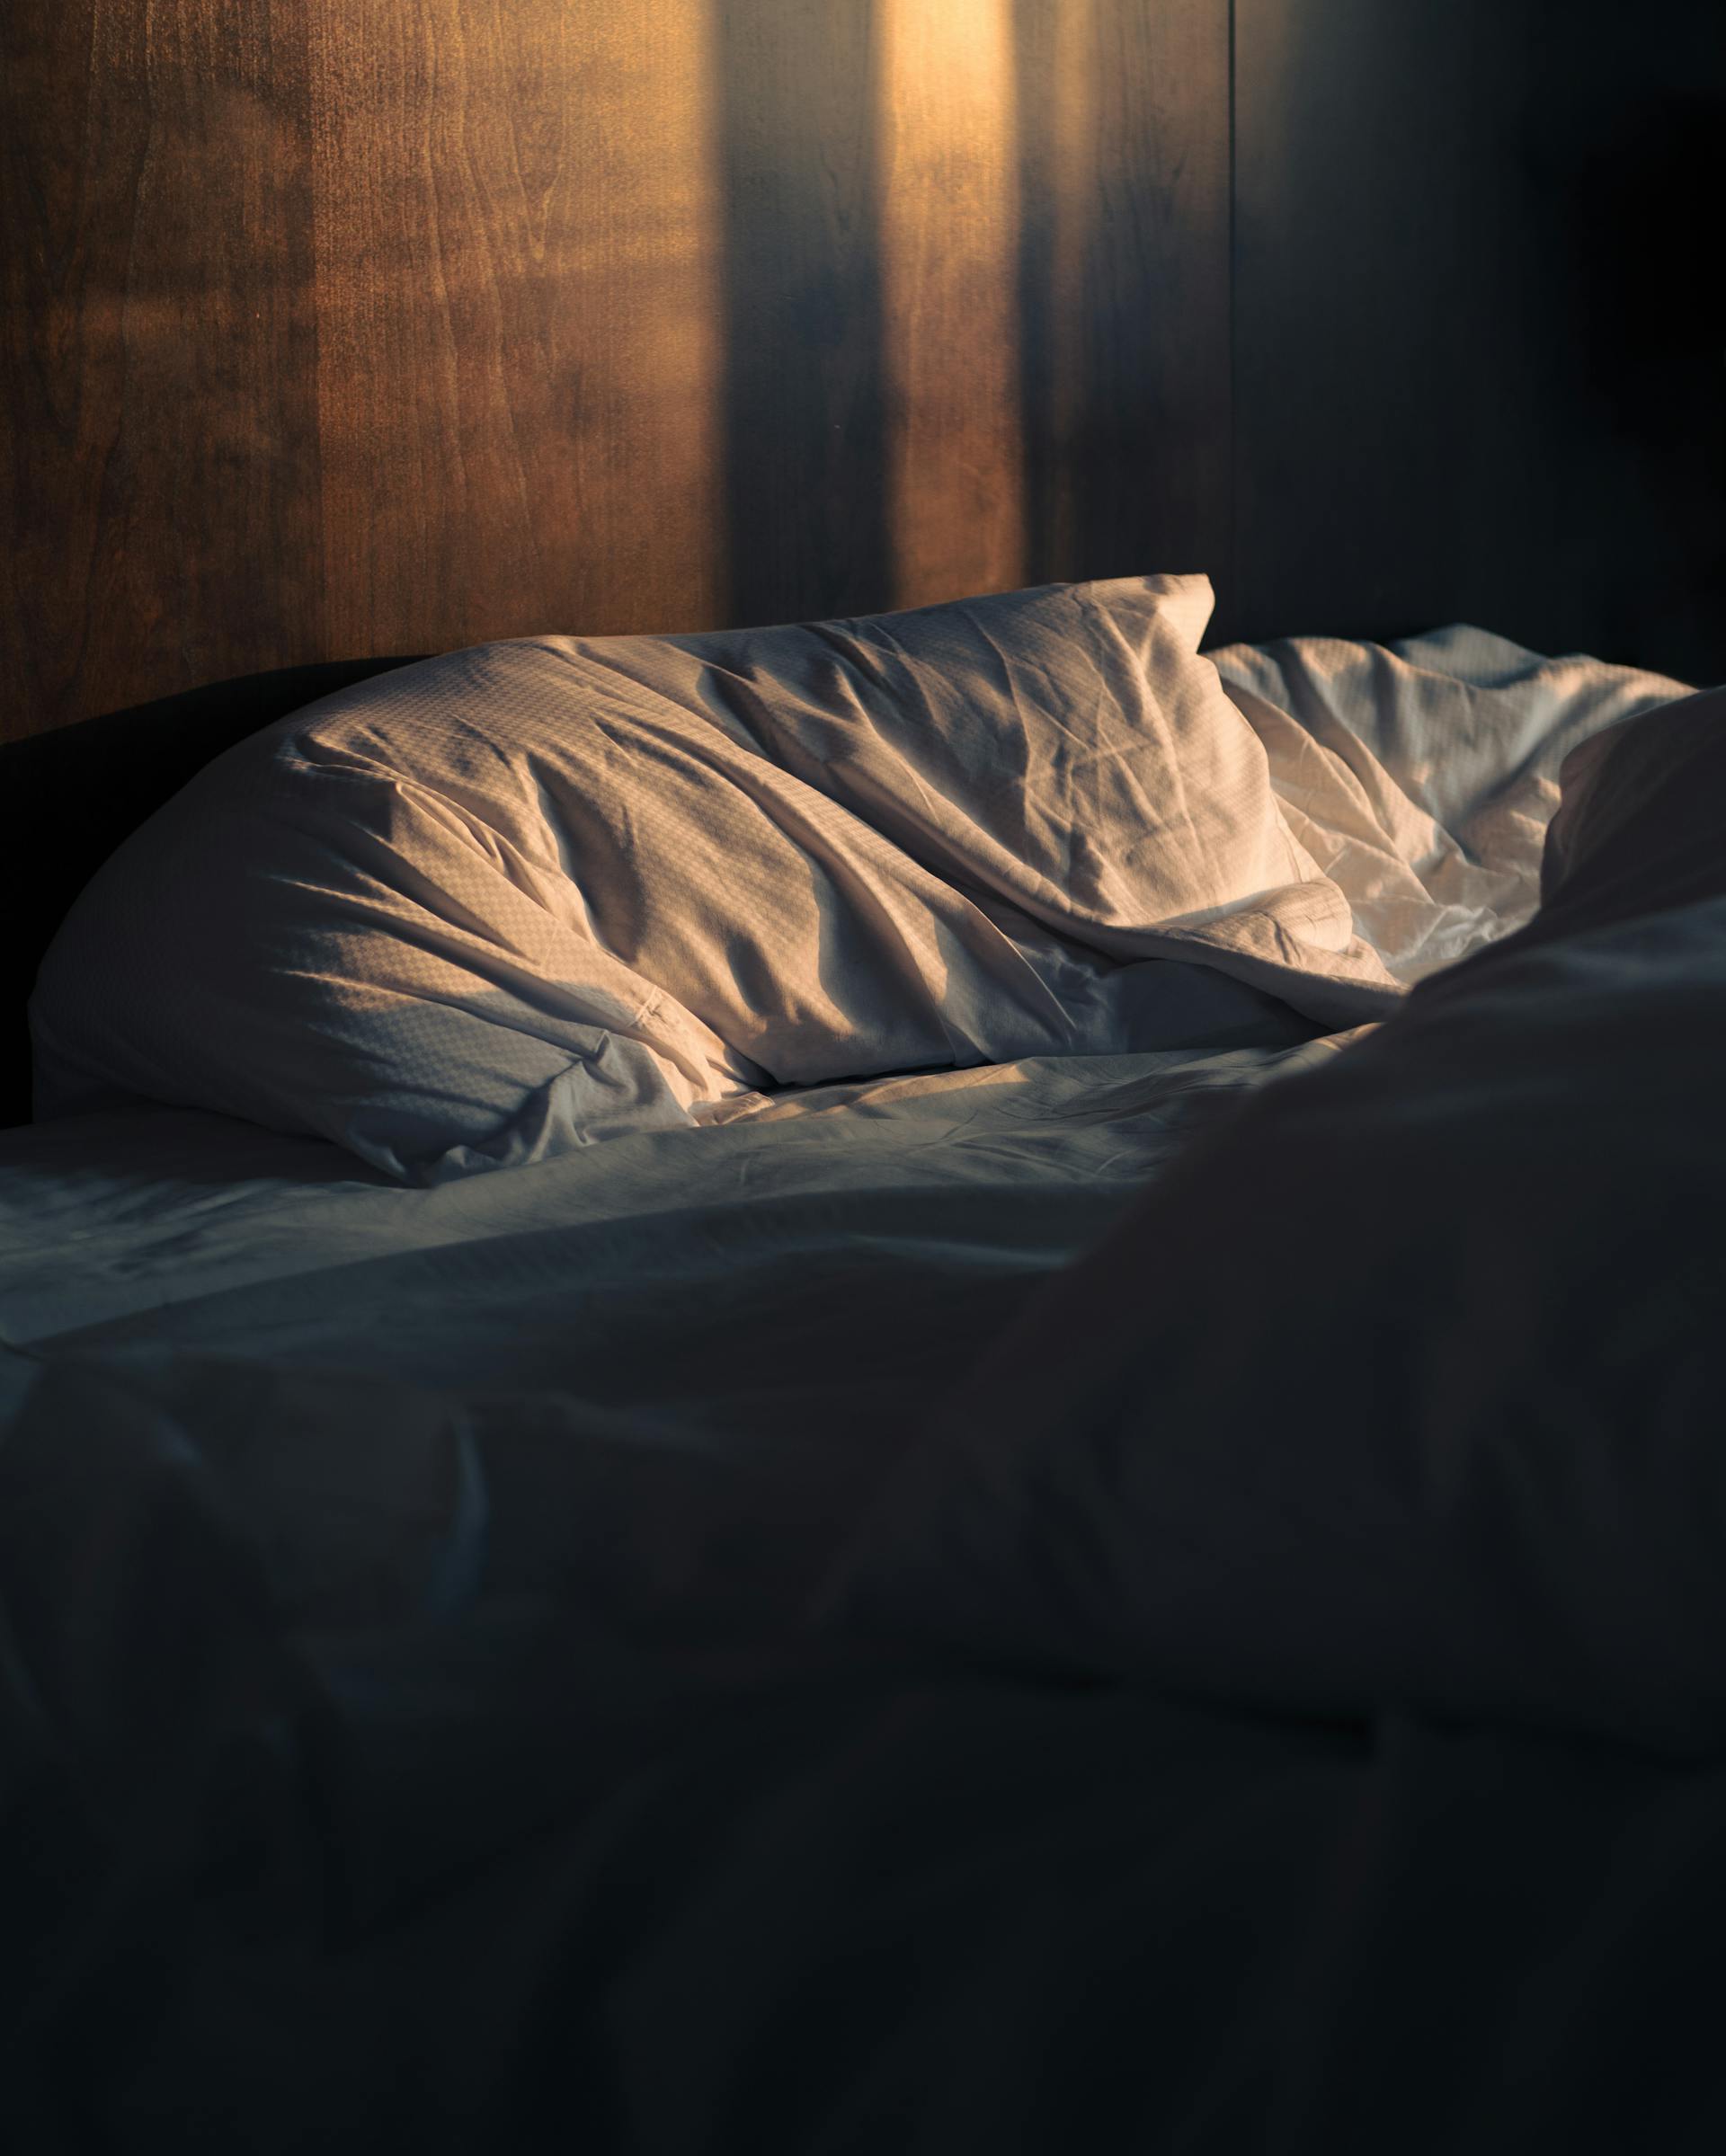 An unmade bed | Source: Pexels